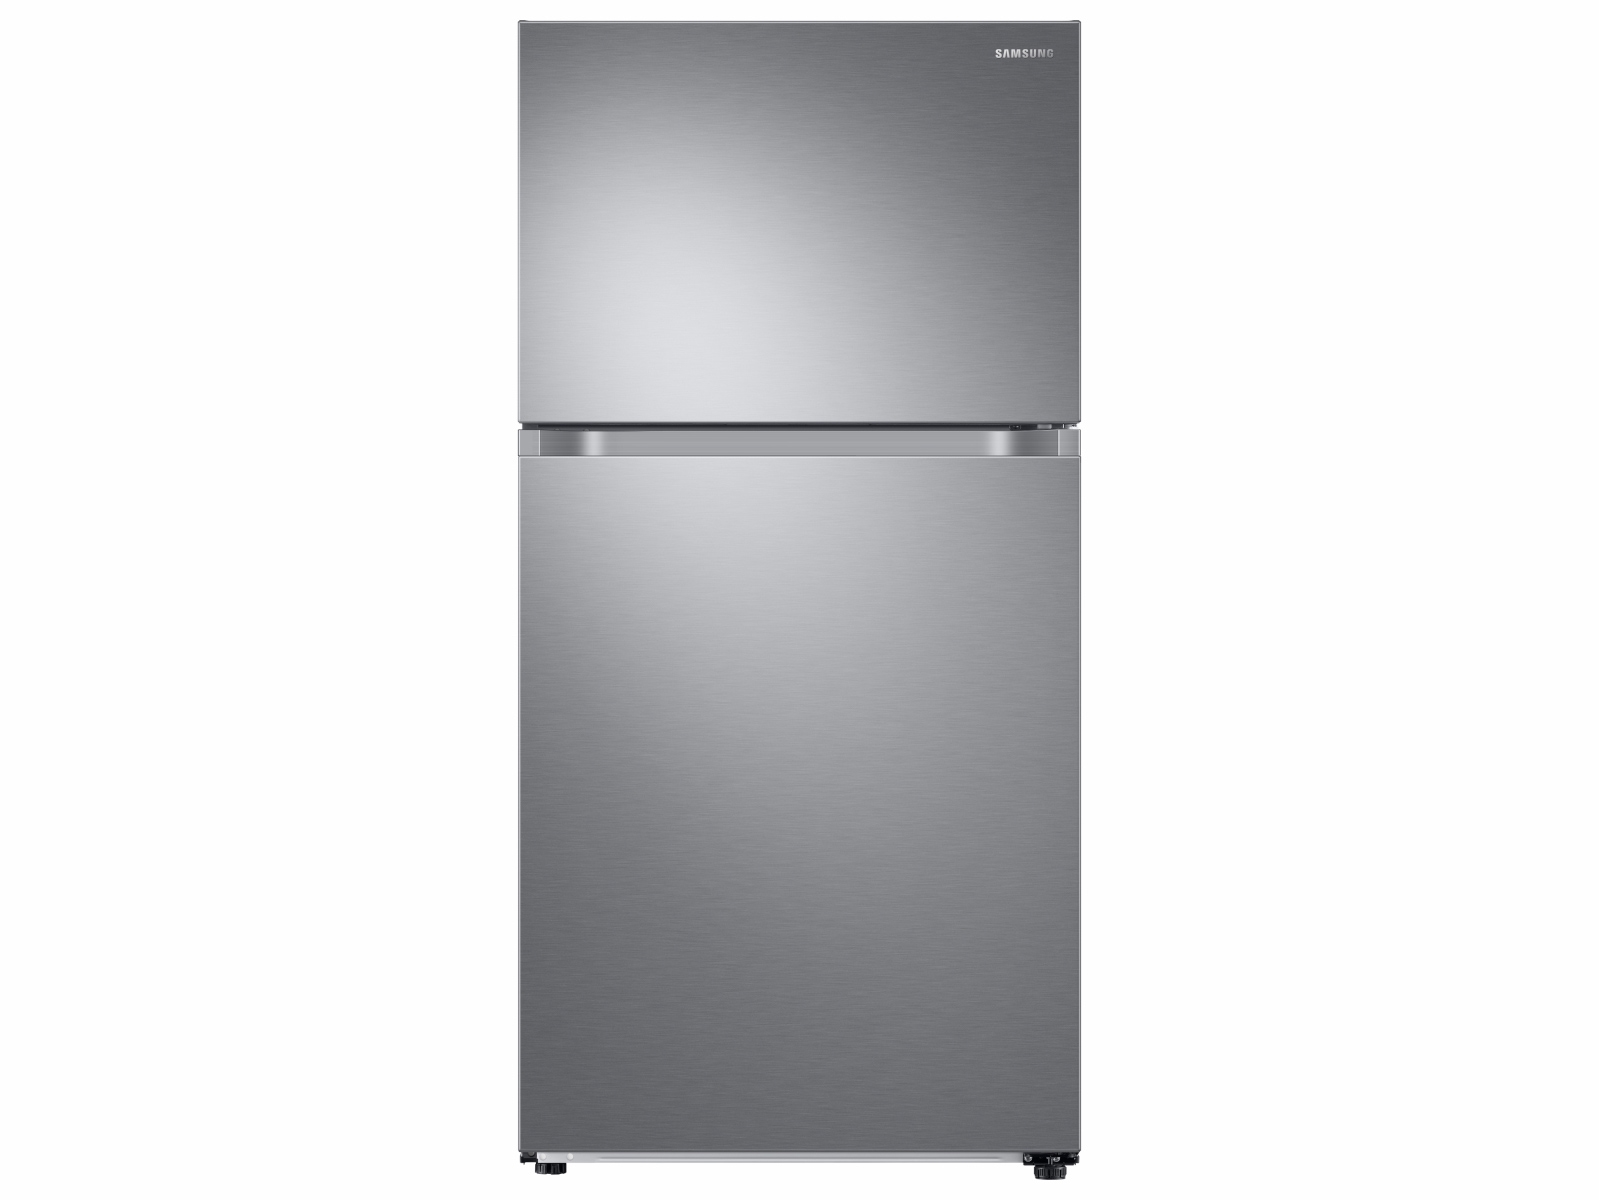 7.0 cu. ft. Frost Free Top Freezer Refrigerator in Stainless Steel Look